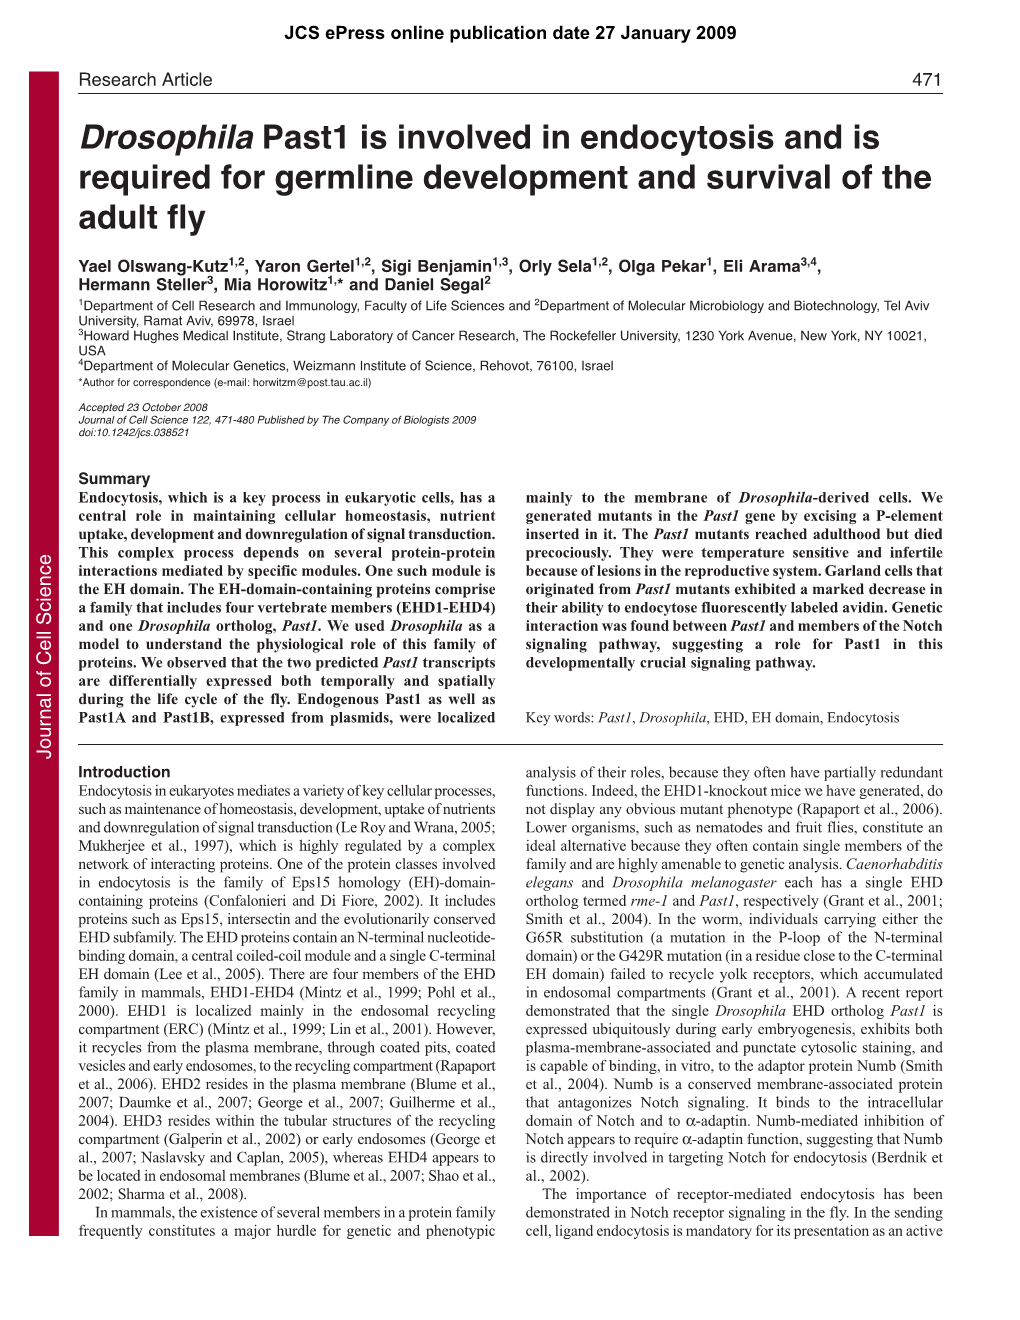 Drosophila Past1 Is Involved in Endocytosis and Is Required for Germline Development and Survival of the Adult Fly